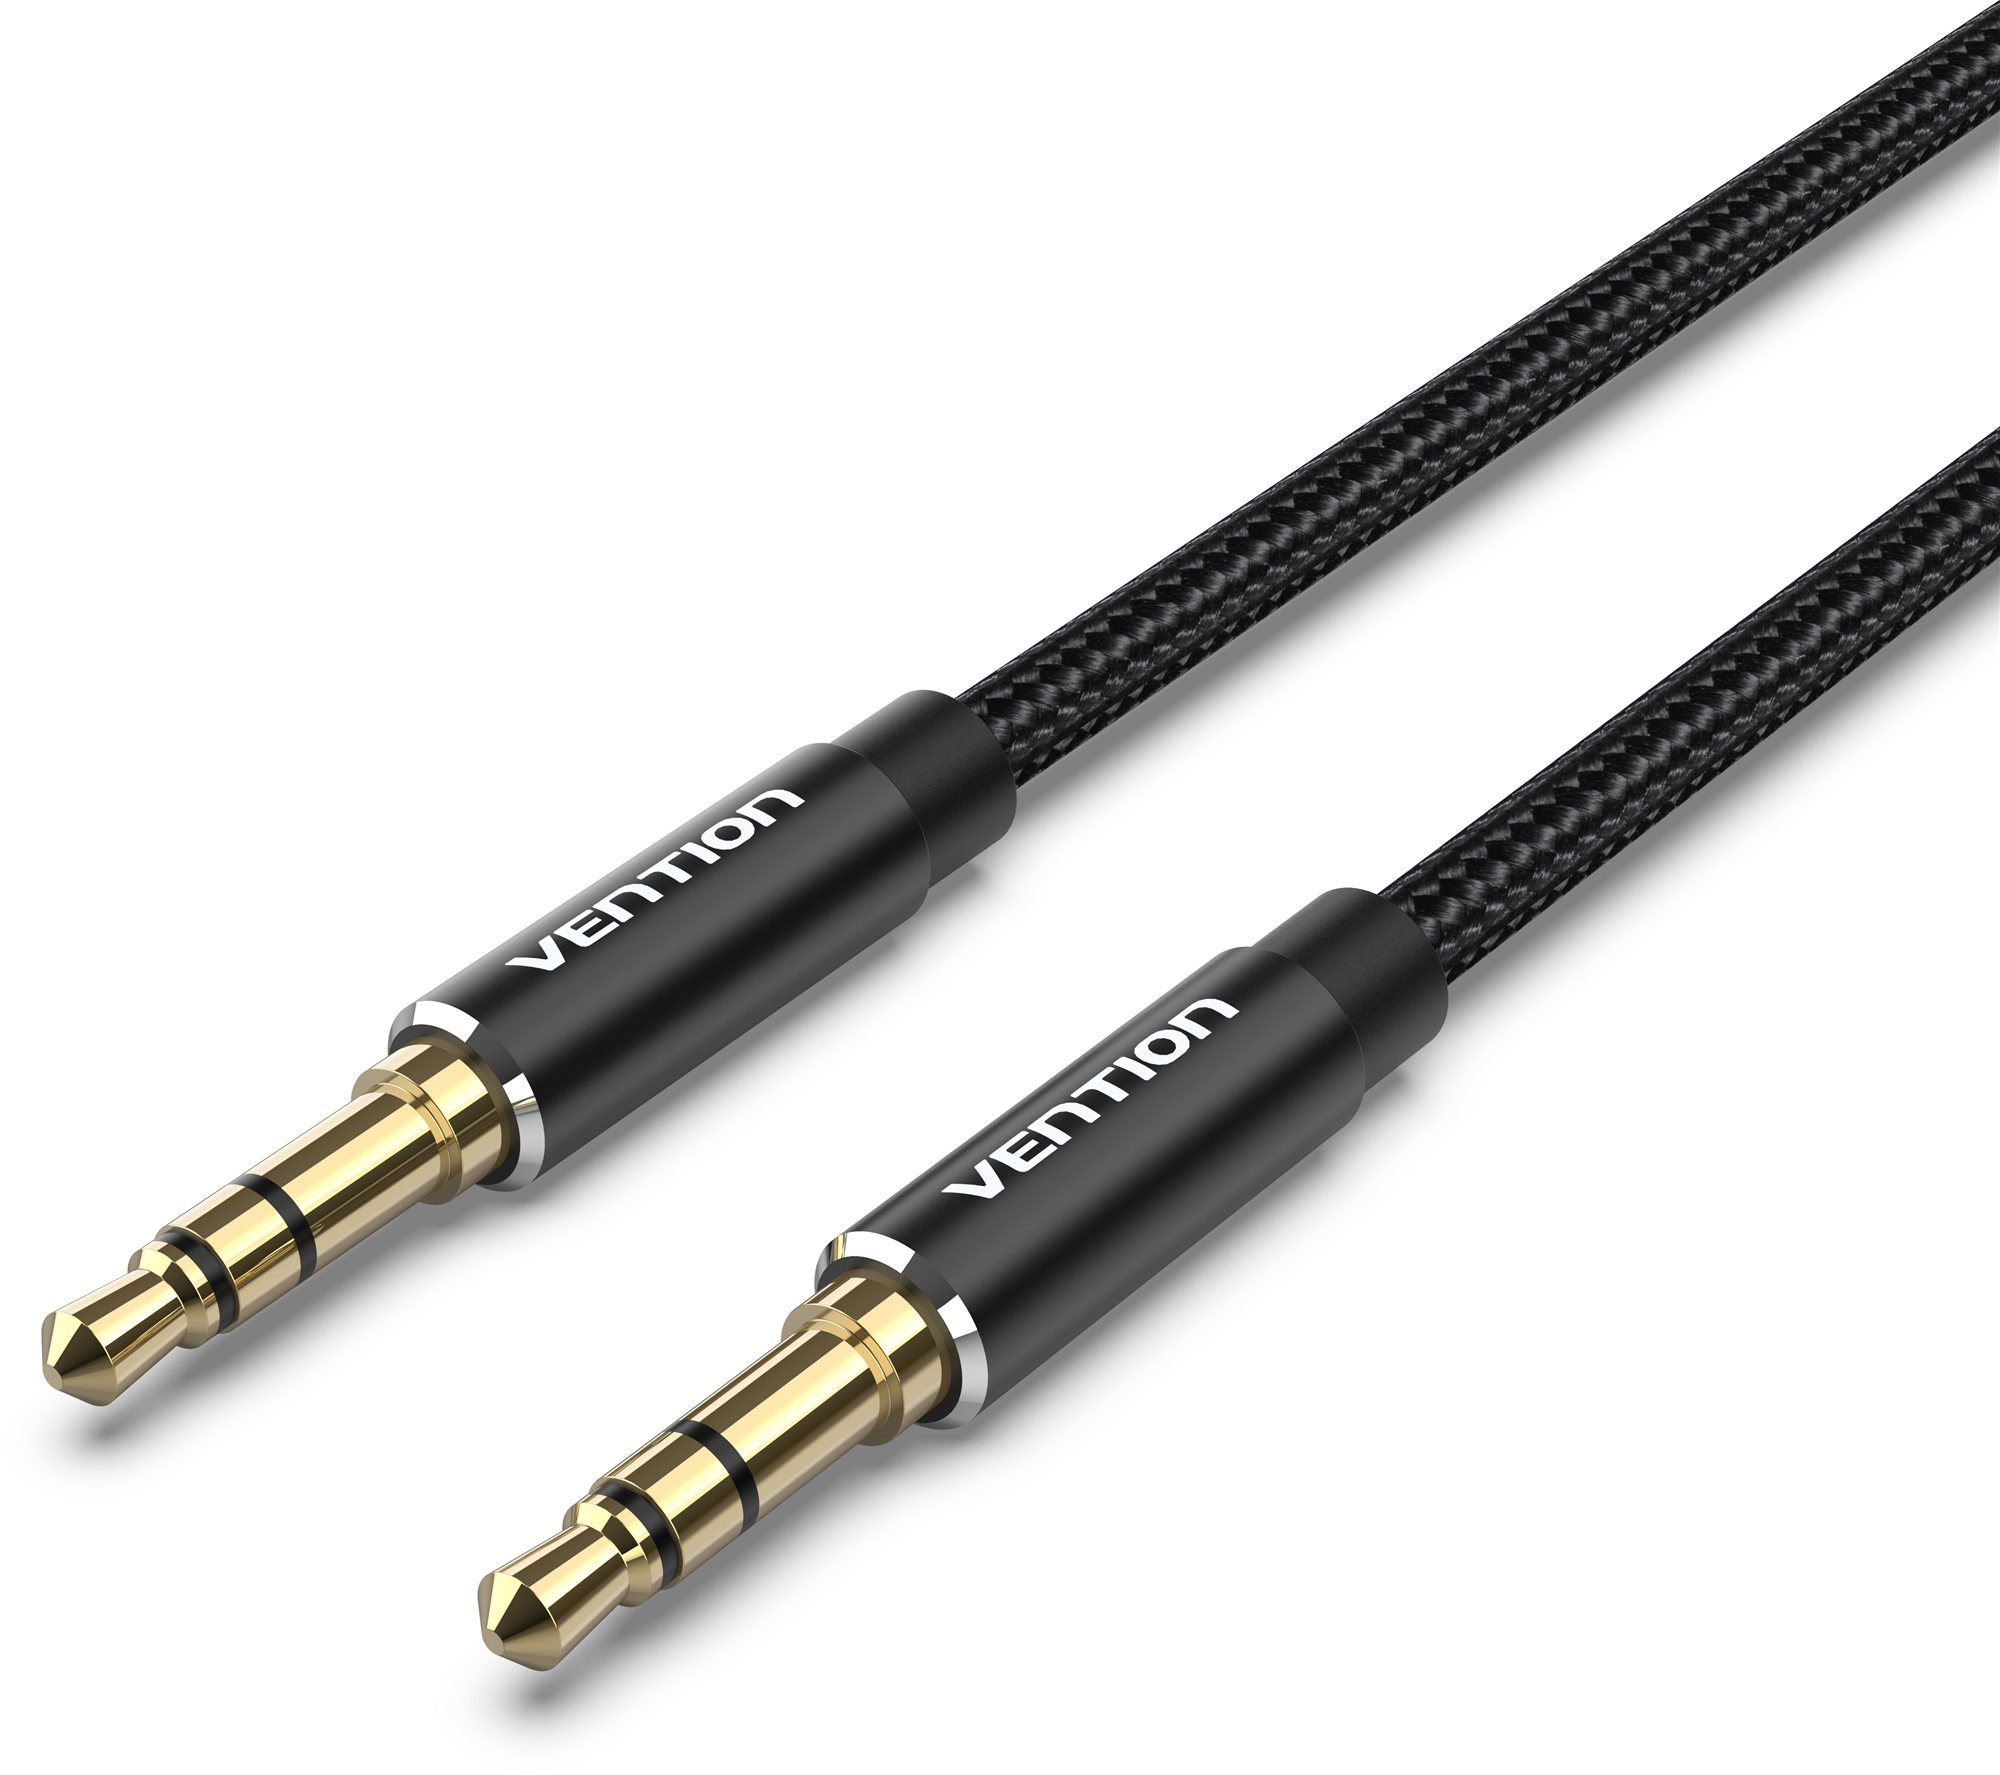 Vention Cotton Braided 3,5 mm Male to Male Audio Cable 2 m Black Aluminum Alloy Type